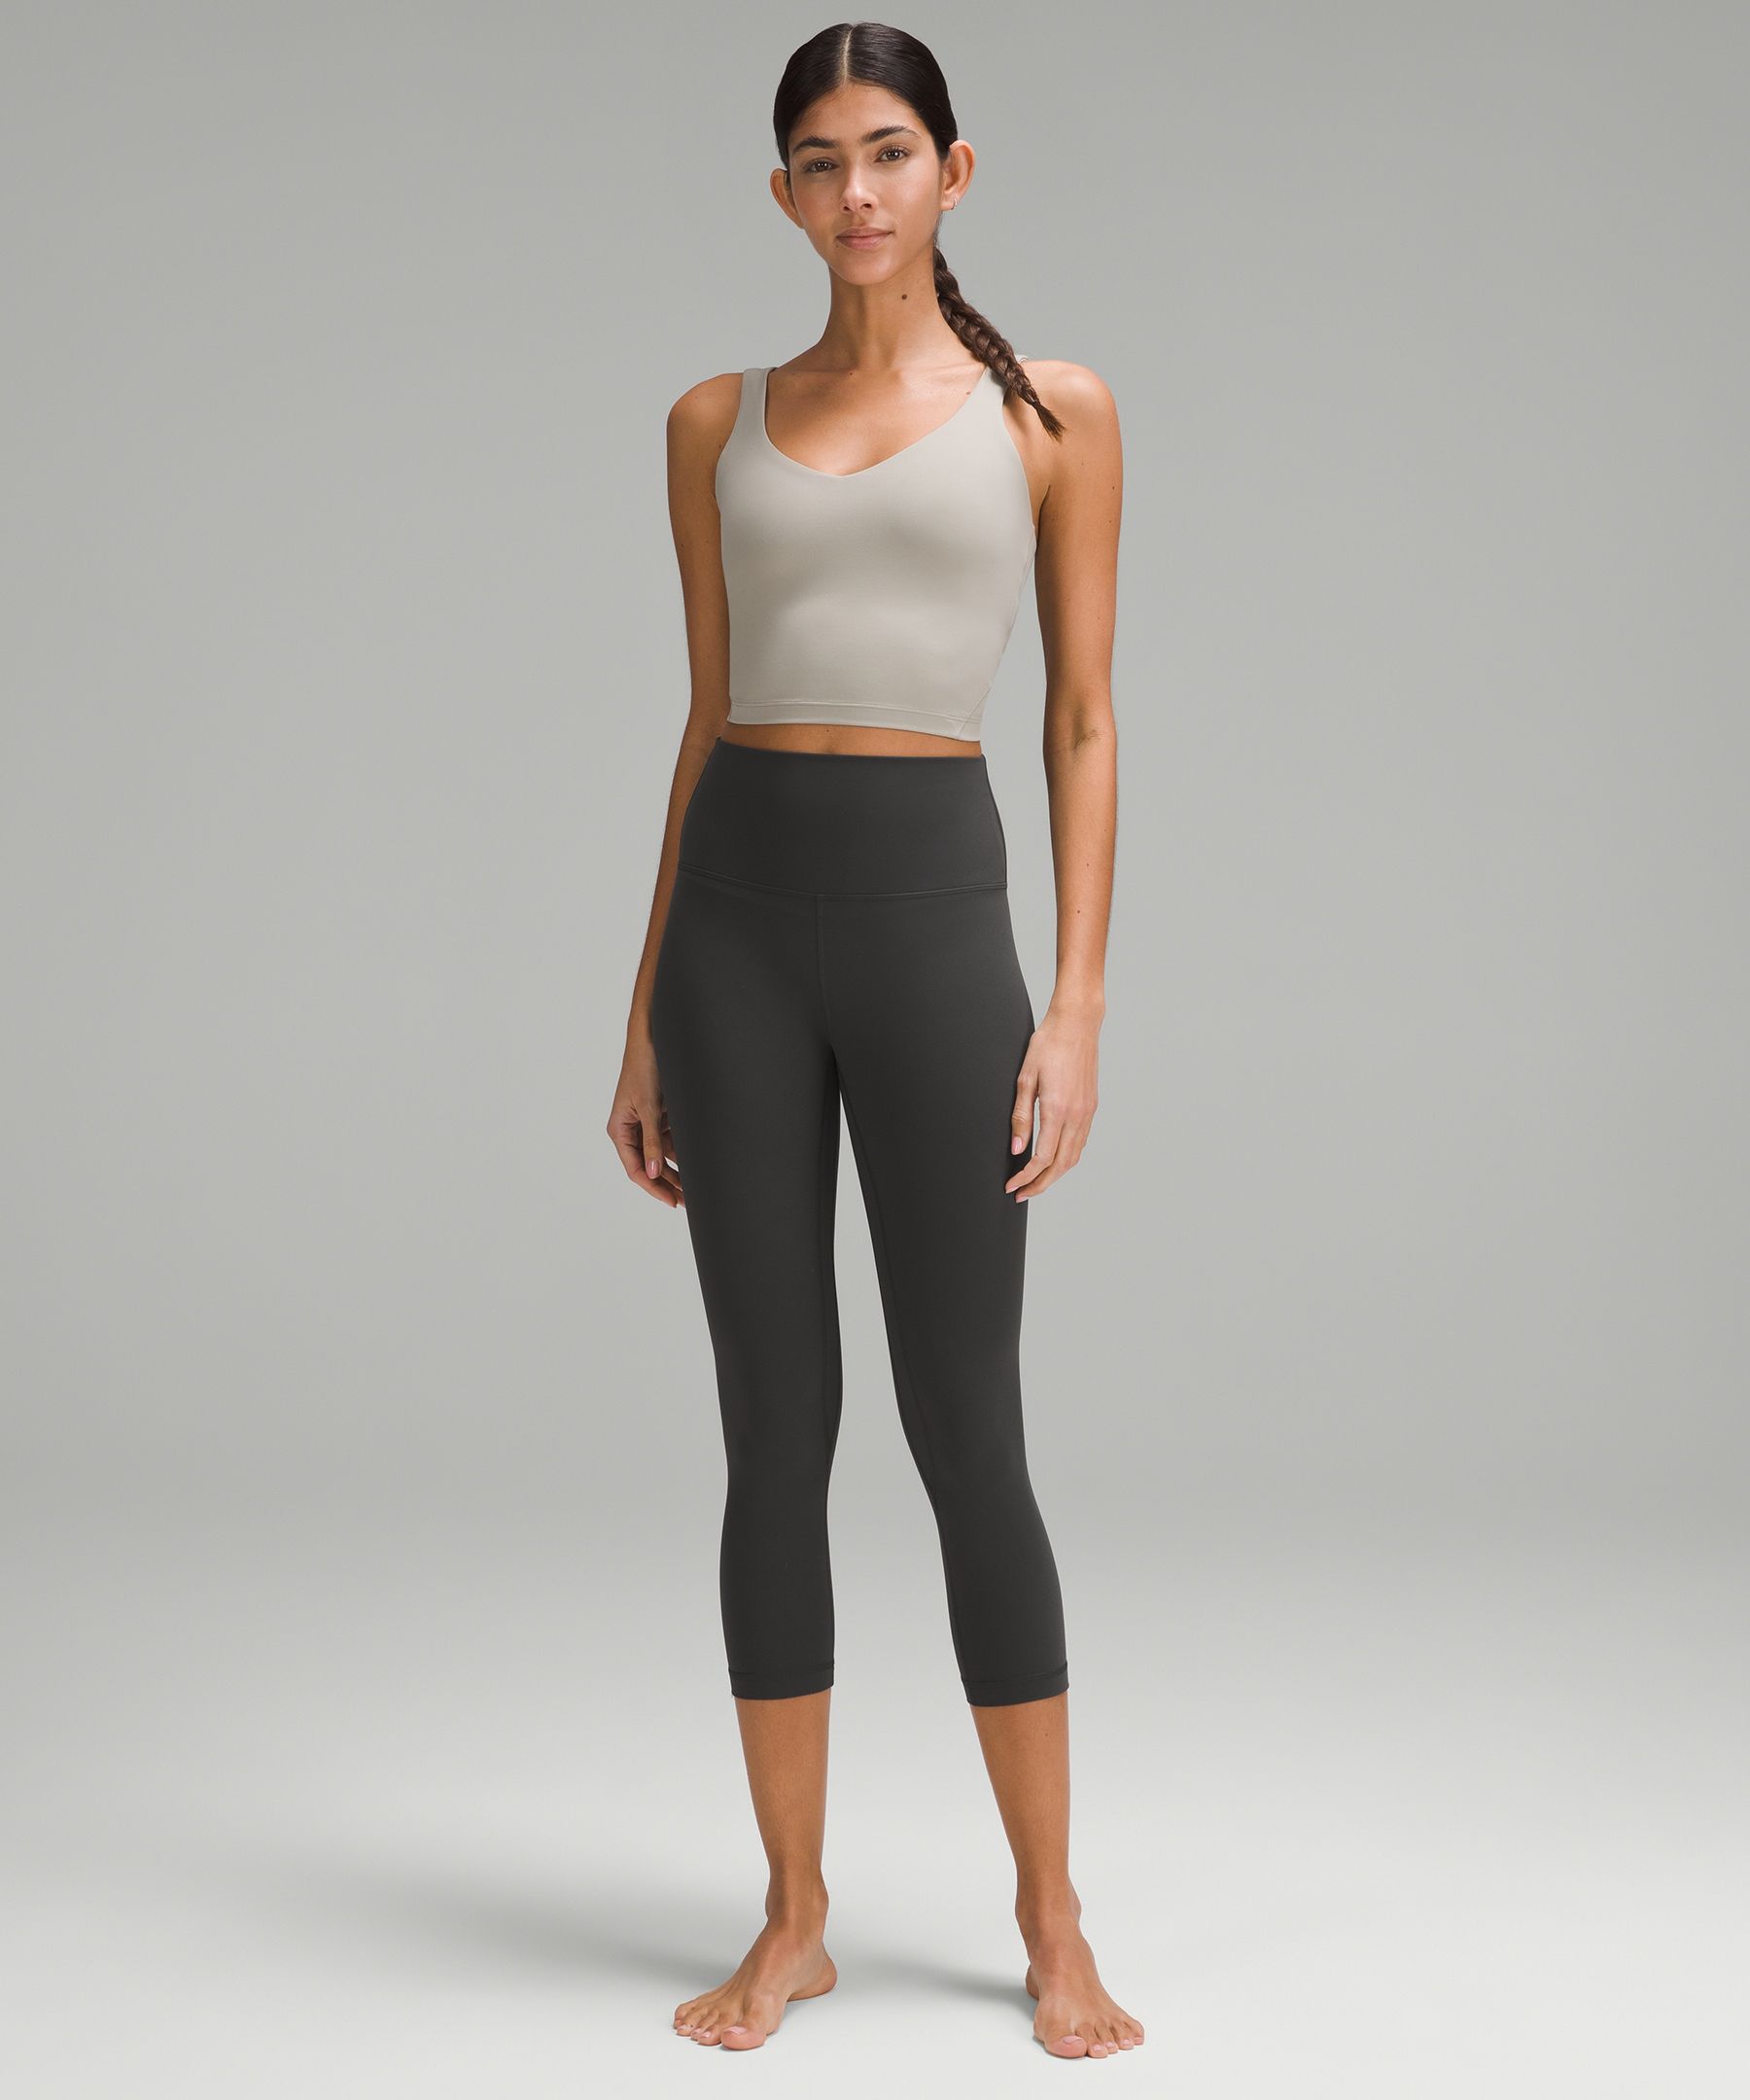 Vitality Cloud Pant Review  Better than the Lululemon Align Pant?